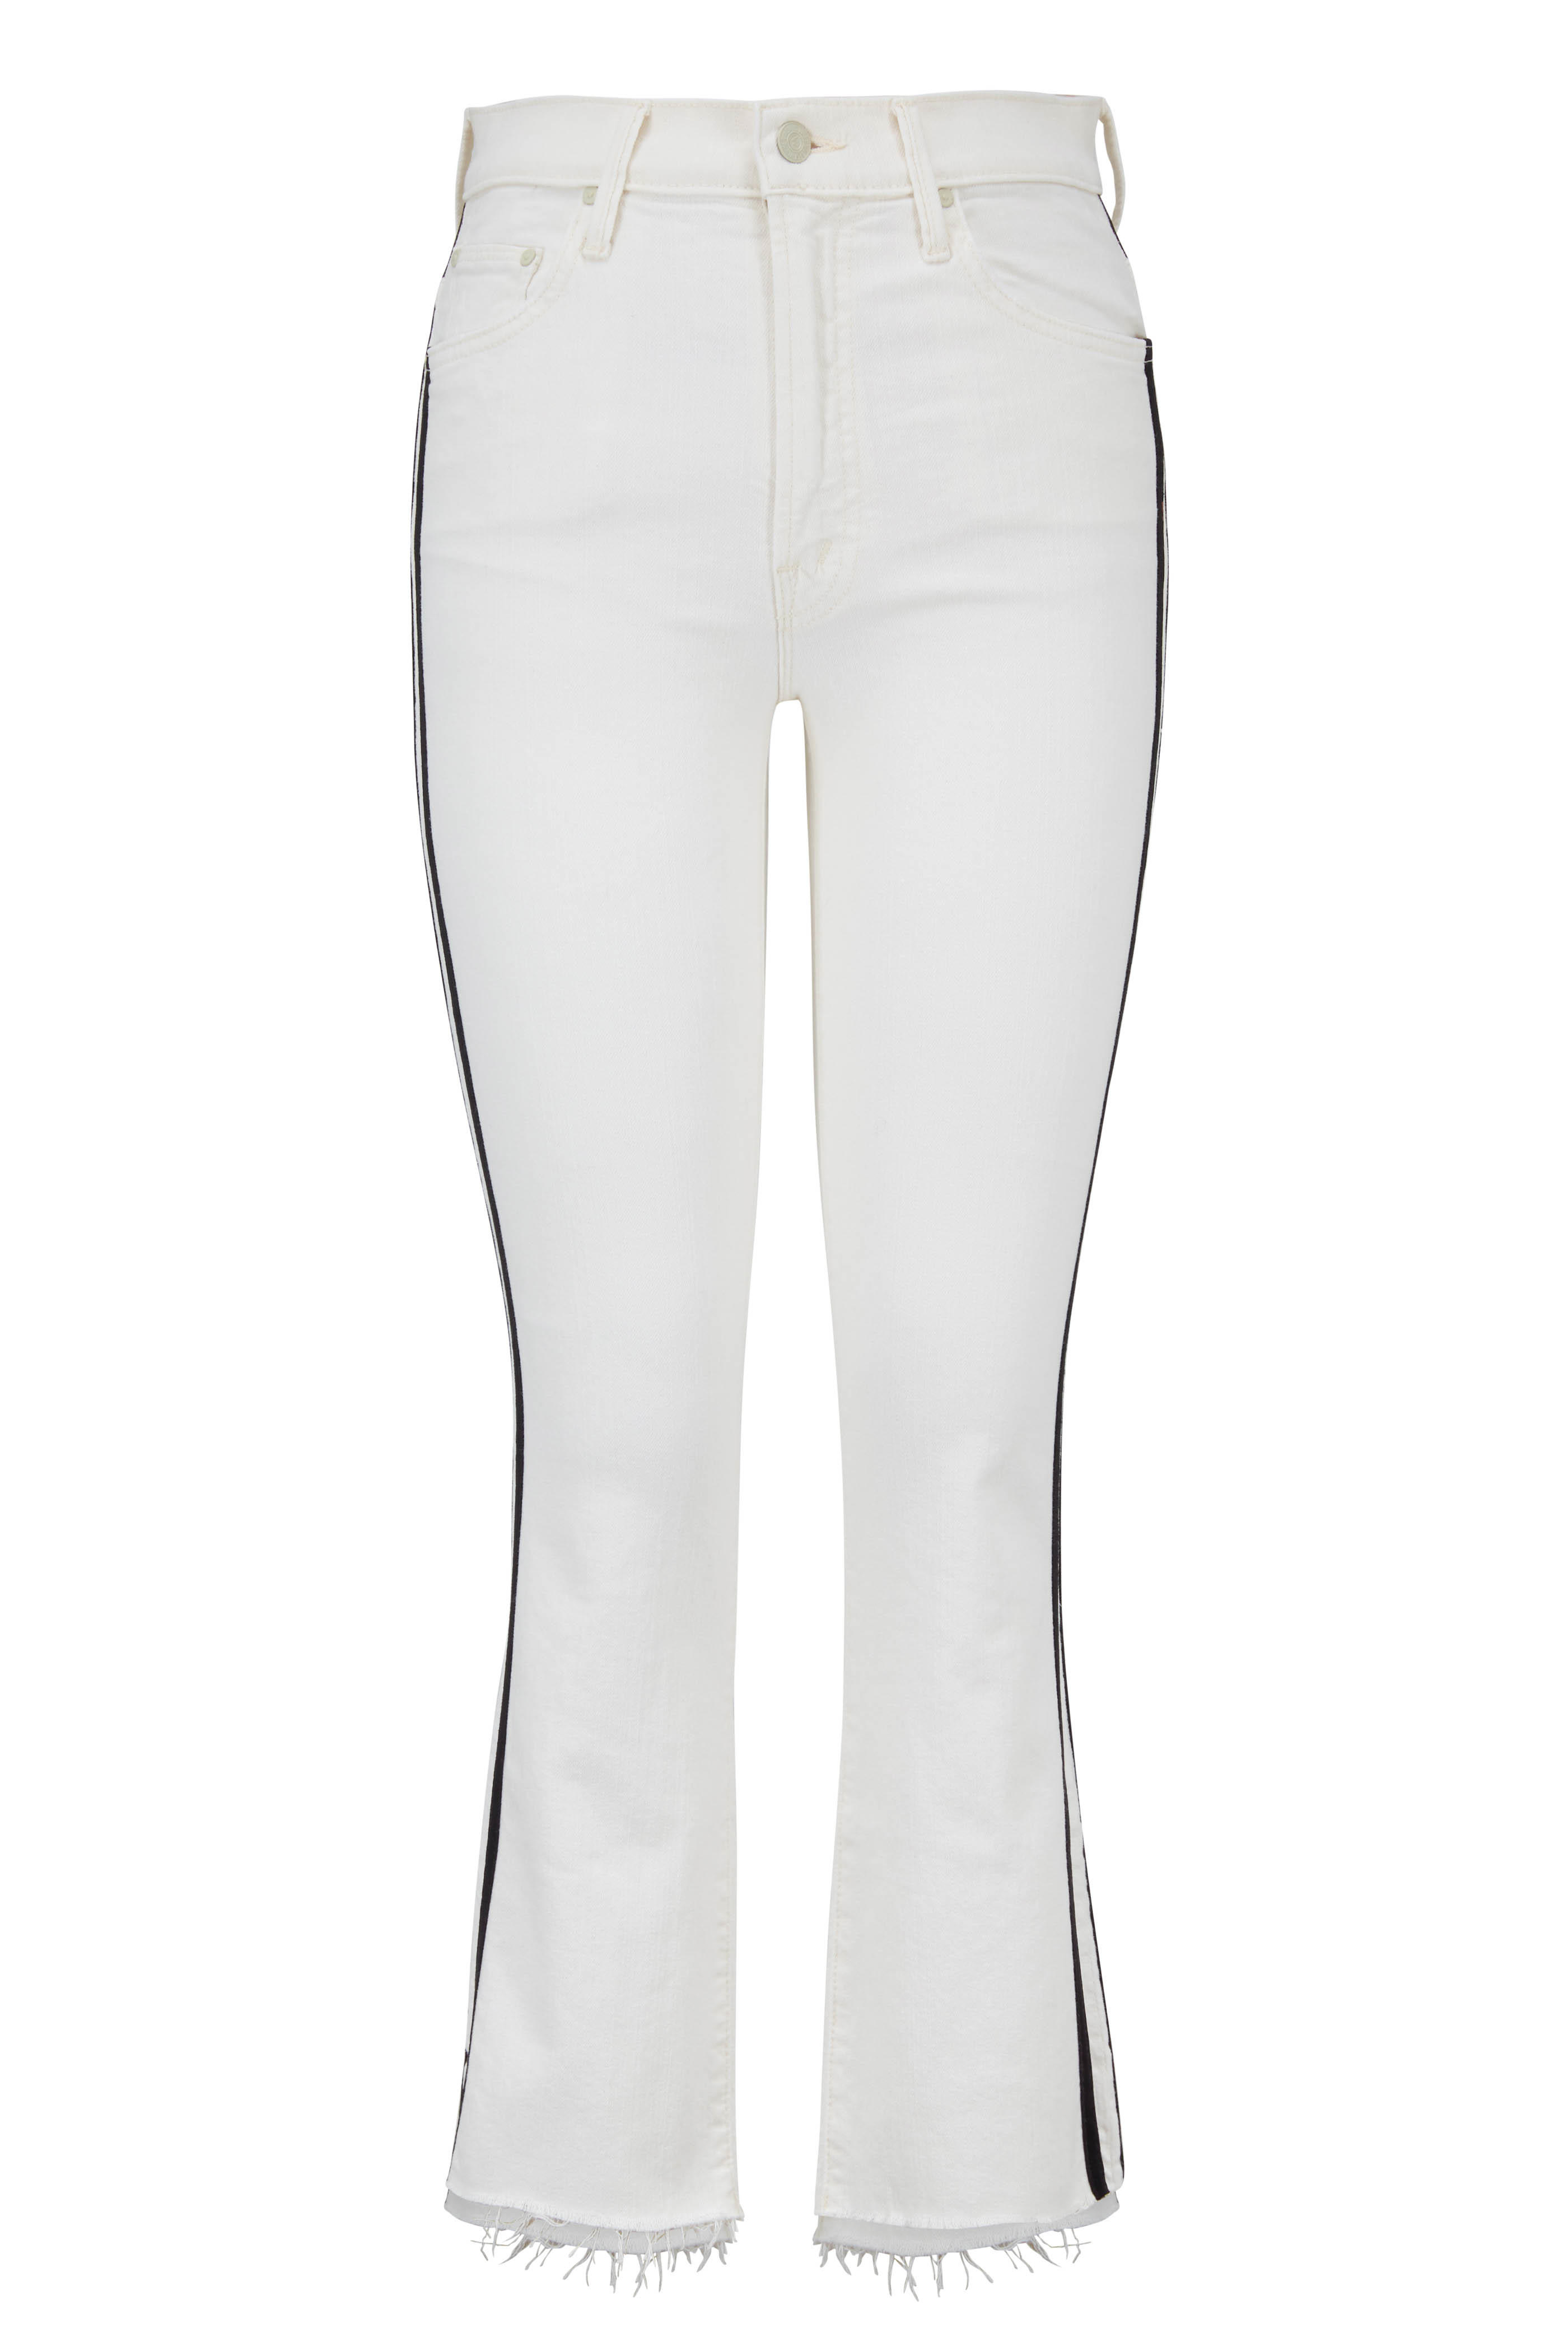 h&m womens jeans